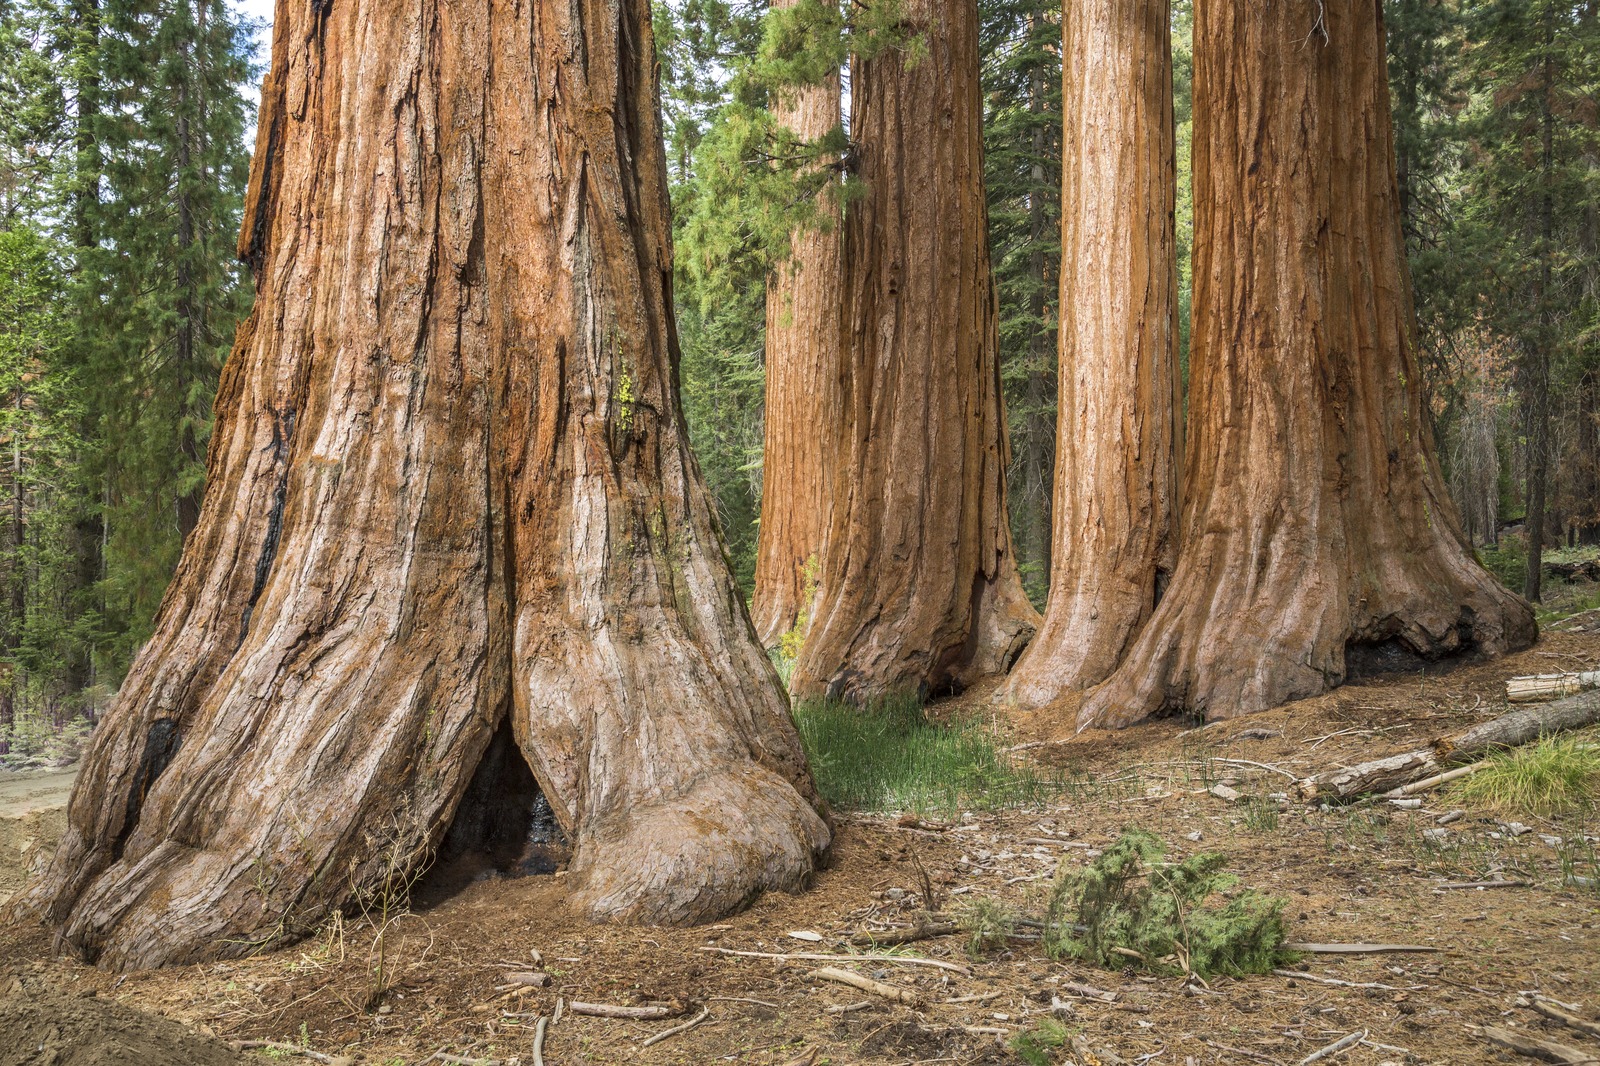 Beauty image of the Mariposa Grove of Giant Sequoias in autumn.